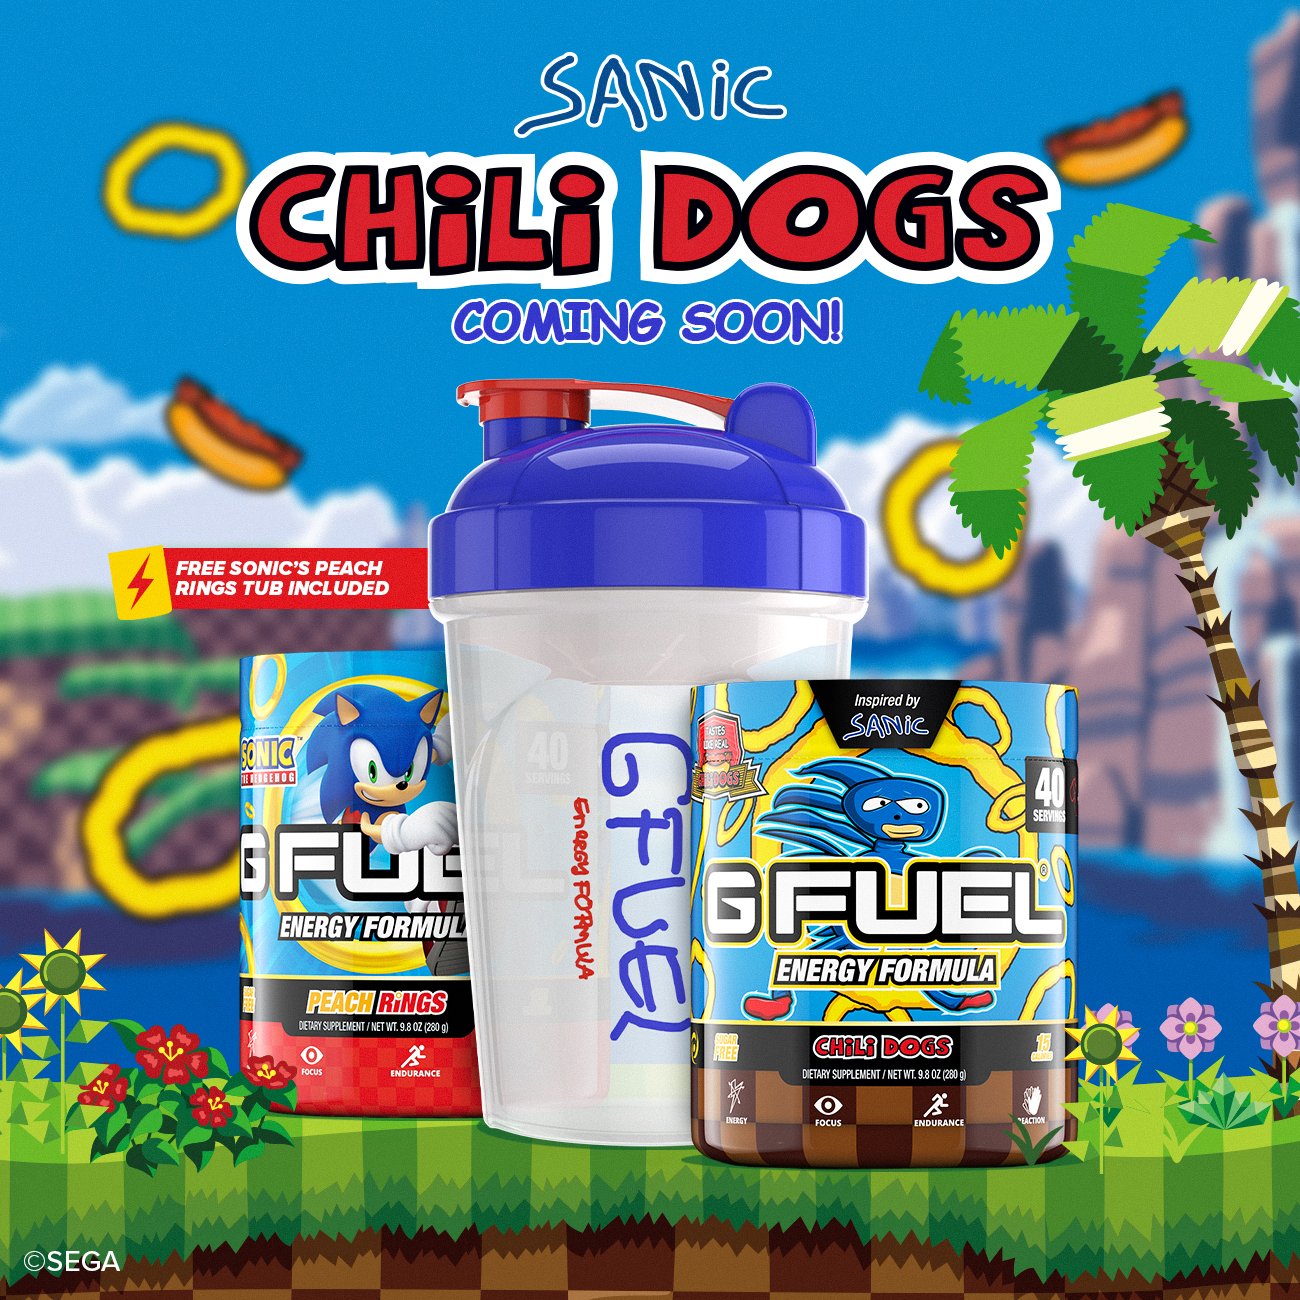 Inspired by SEGA's Sonic the Hedgehog "Sanic" meme, the G FUEL Sanic gamer energy drink bundle includes a Sanic Chili Dogs tub, Sanic shaker cup, and a free Sonic's Peach Rings tub